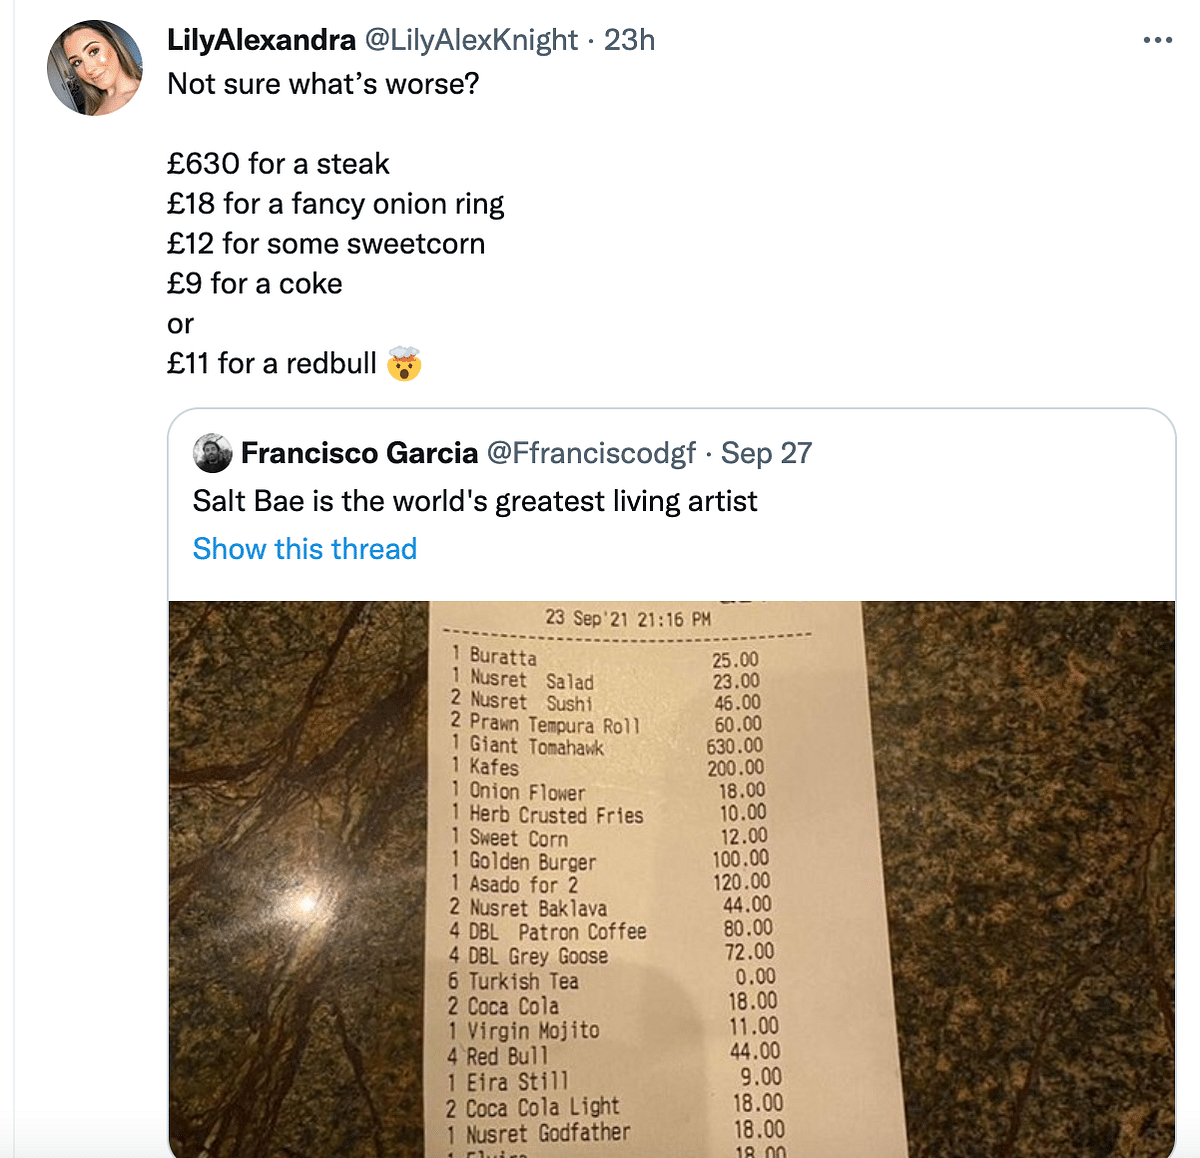 Right from £11 for a can of Red Bull, to a £236 service charge, a user shared a bill from the restaurant on Twitter.